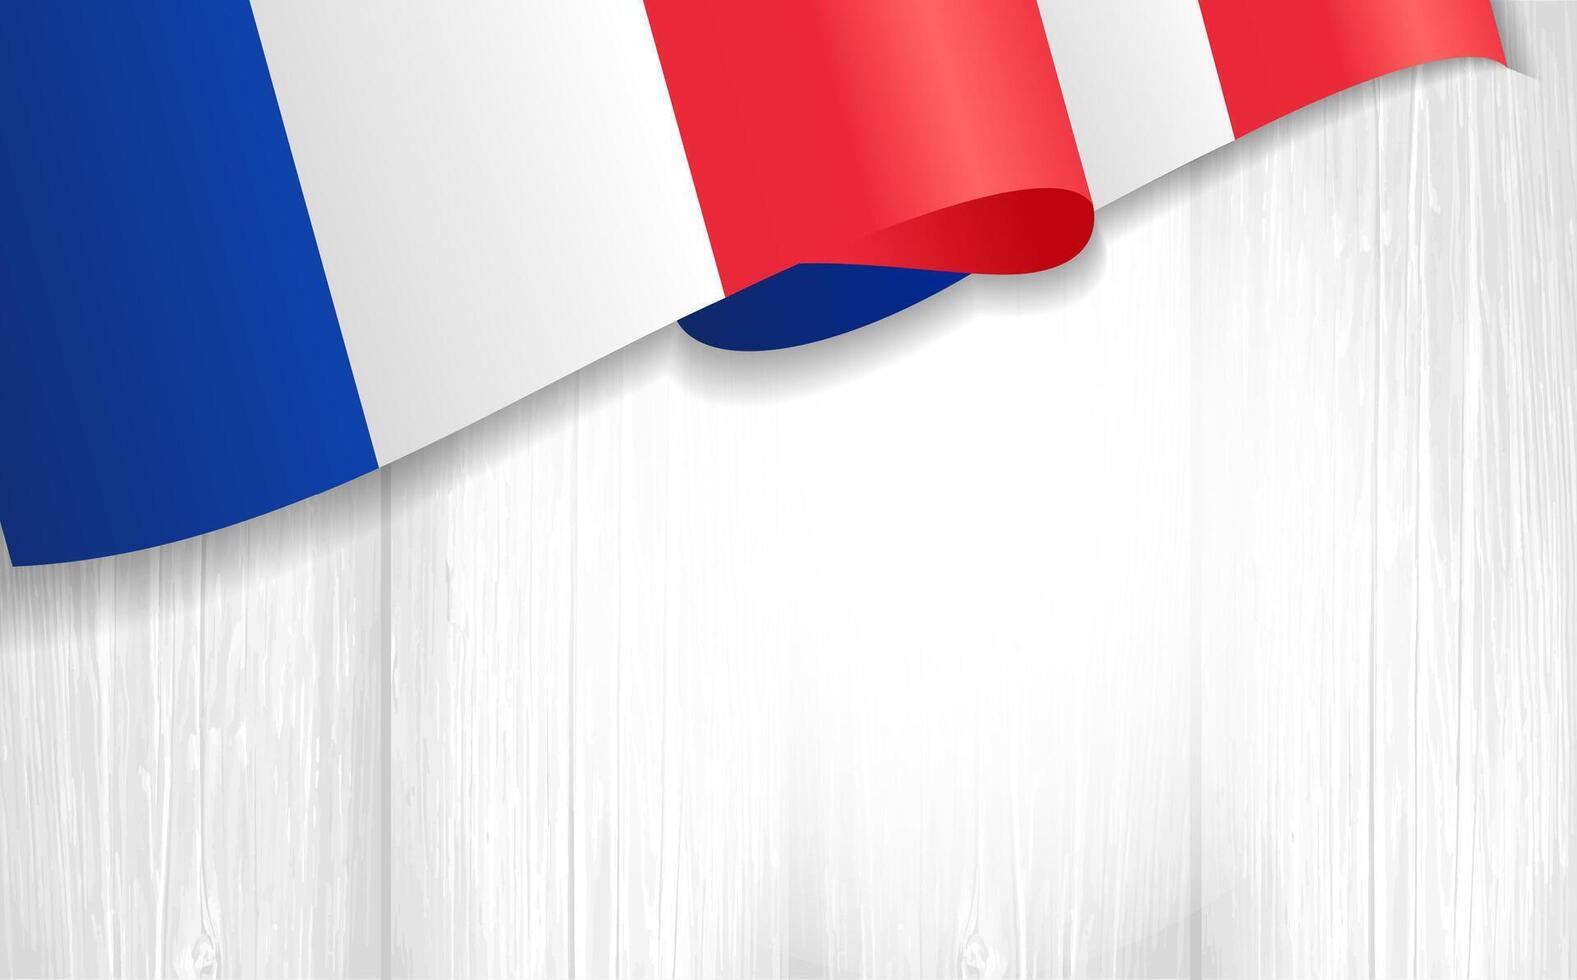 3d France flag on wooden plank. Creative background with French national flag. Vector illustration